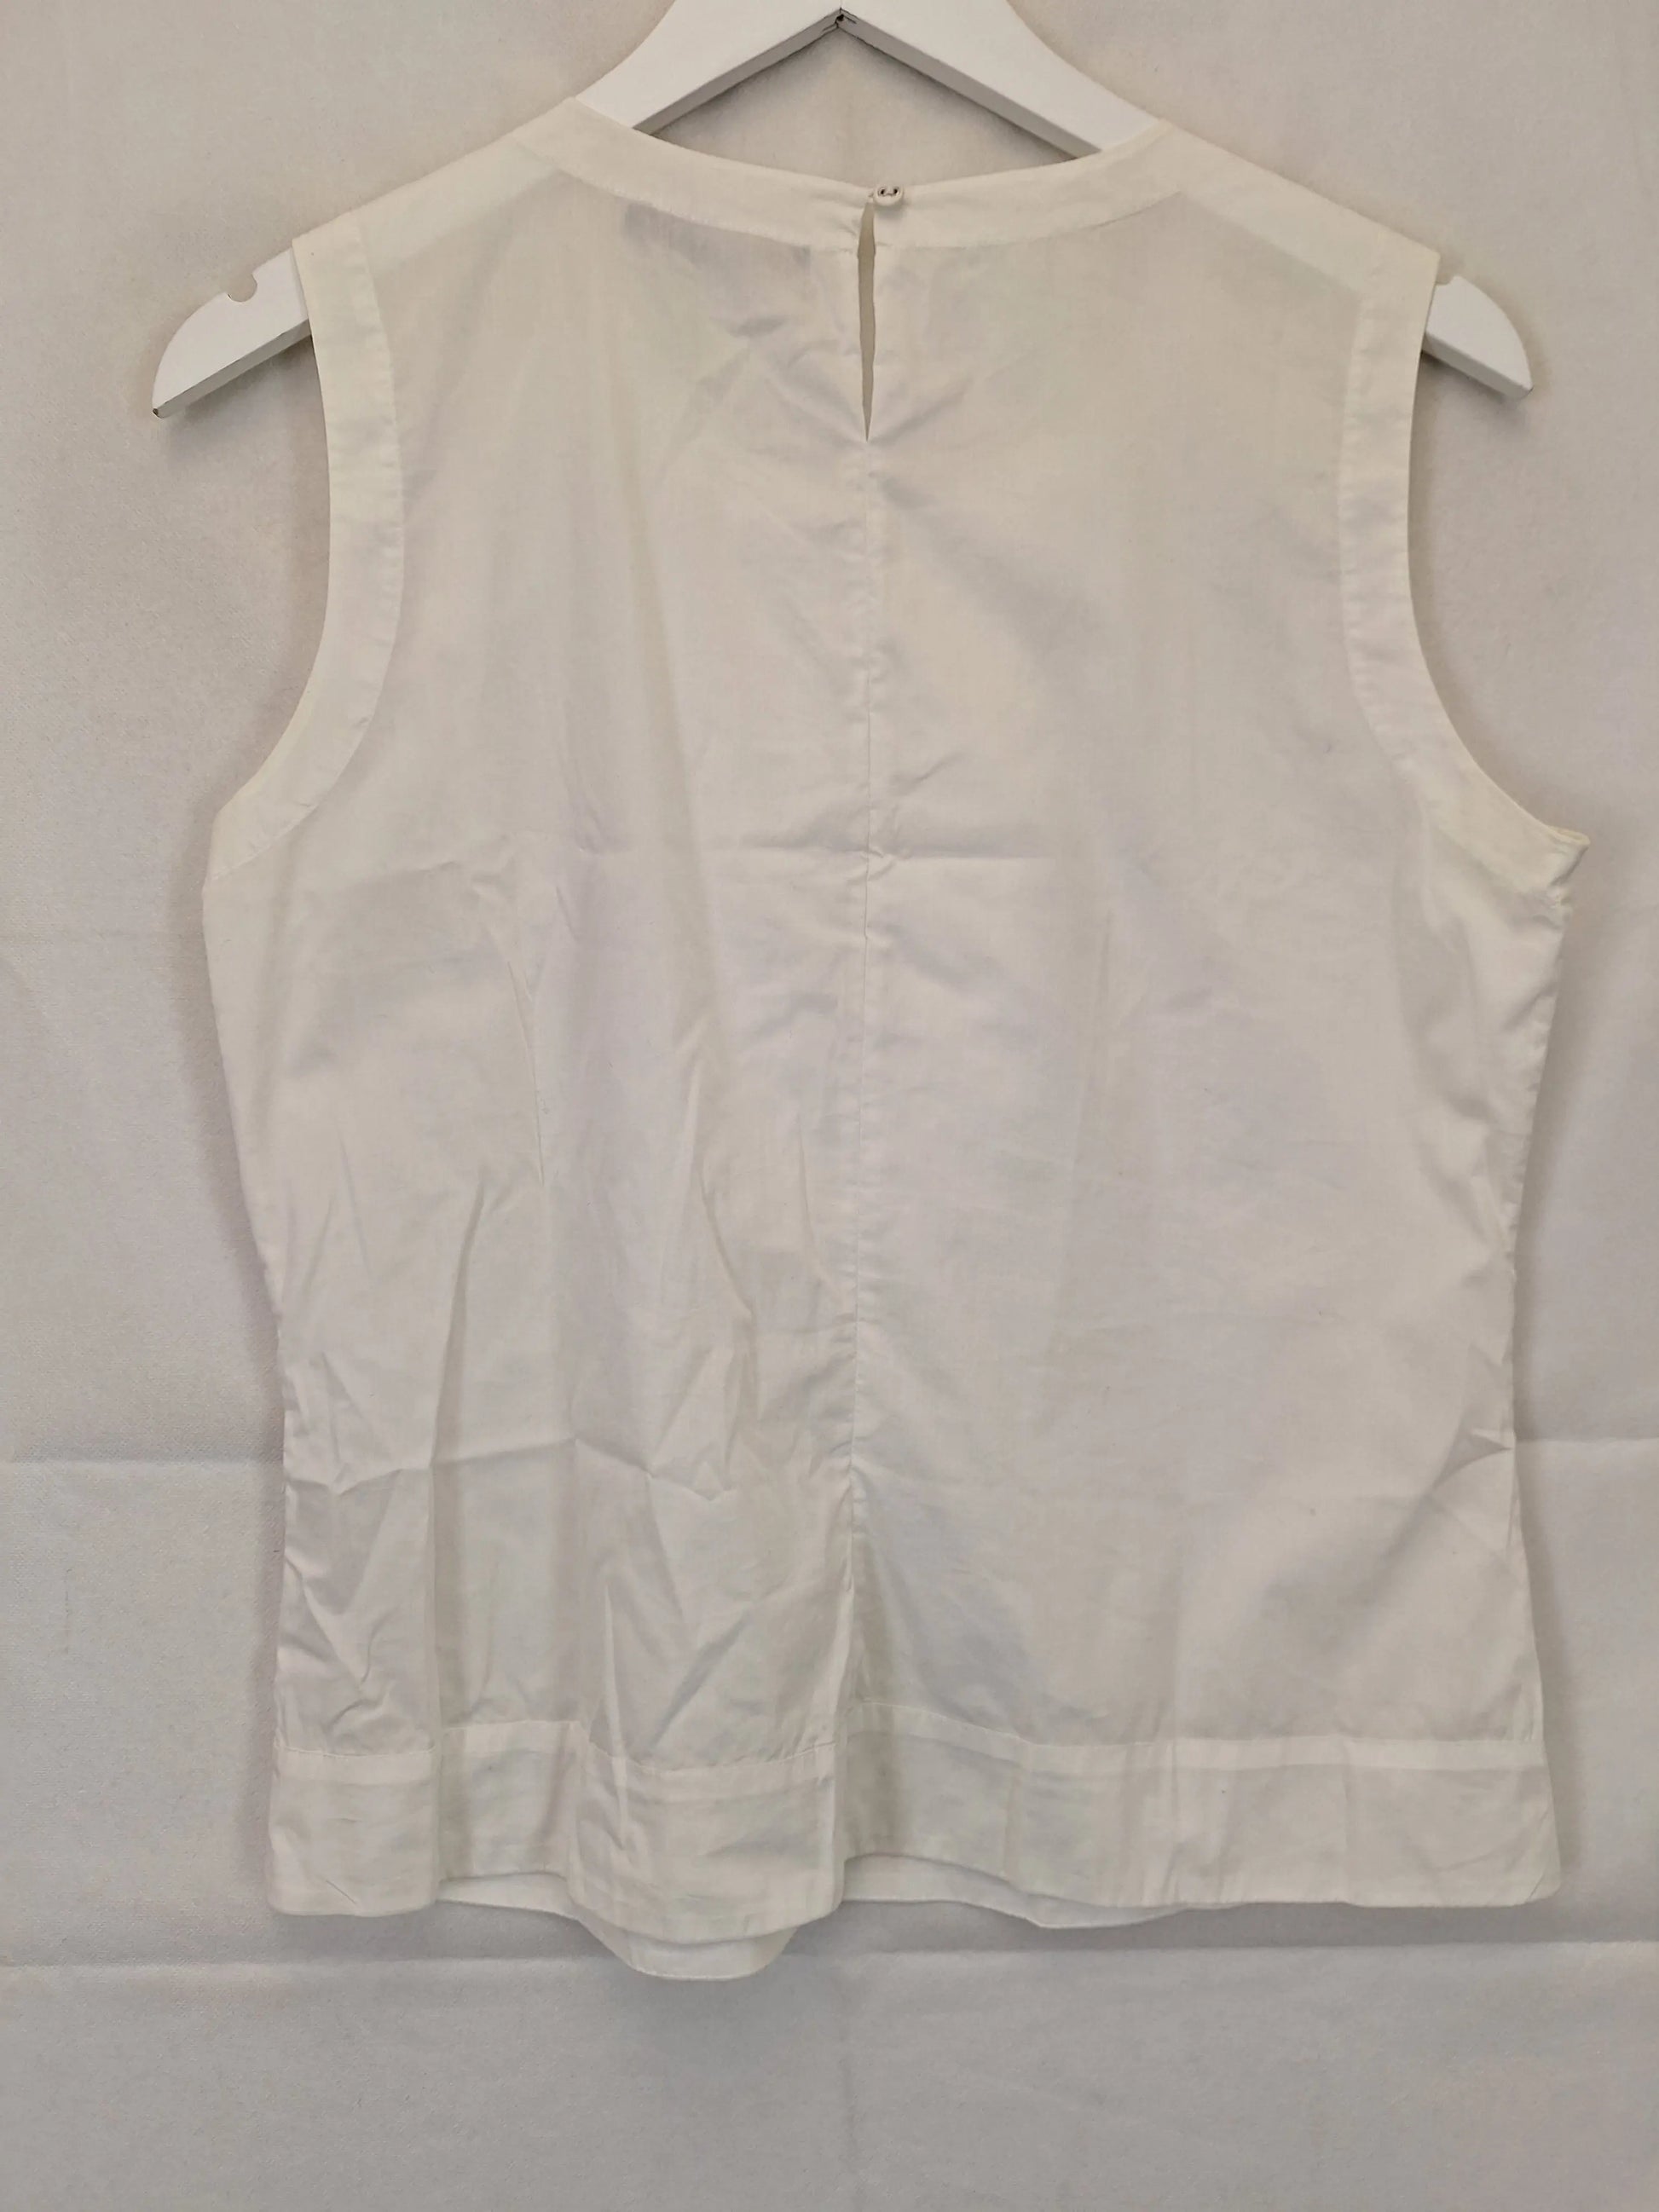 David Lawrence Vanilla Sophisticated Ruffle  Top Size 10 by SwapUp-Online Second Hand Store-Online Thrift Store